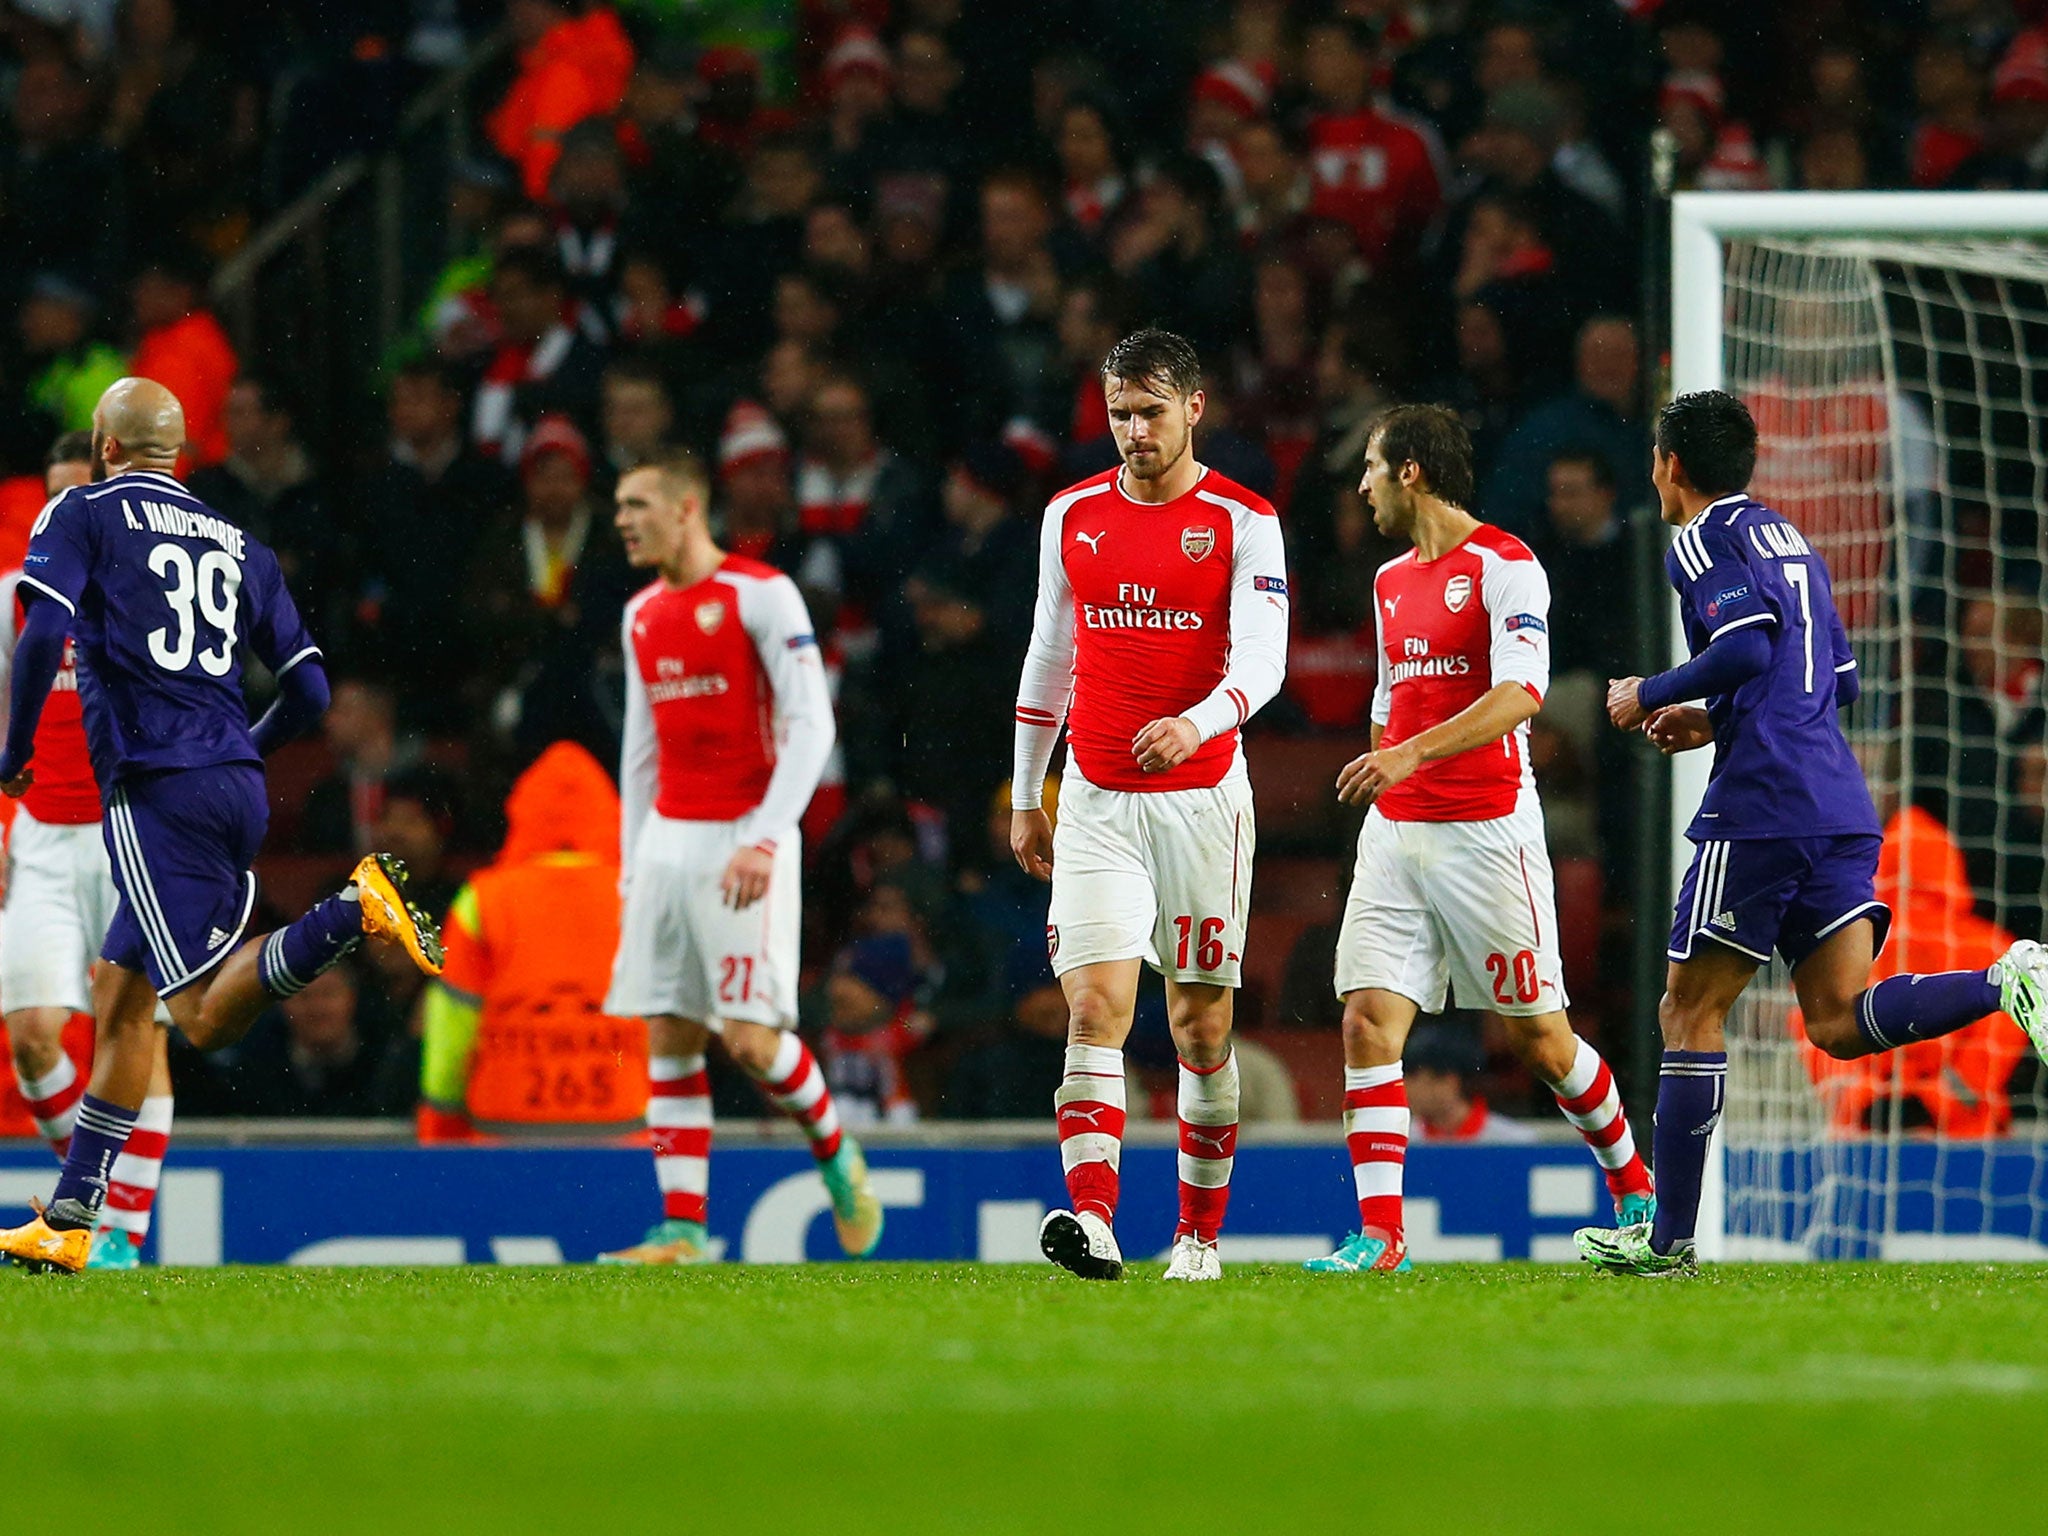 Arsenal players react after Anderlecht scored their third goal in the 3-3 draw